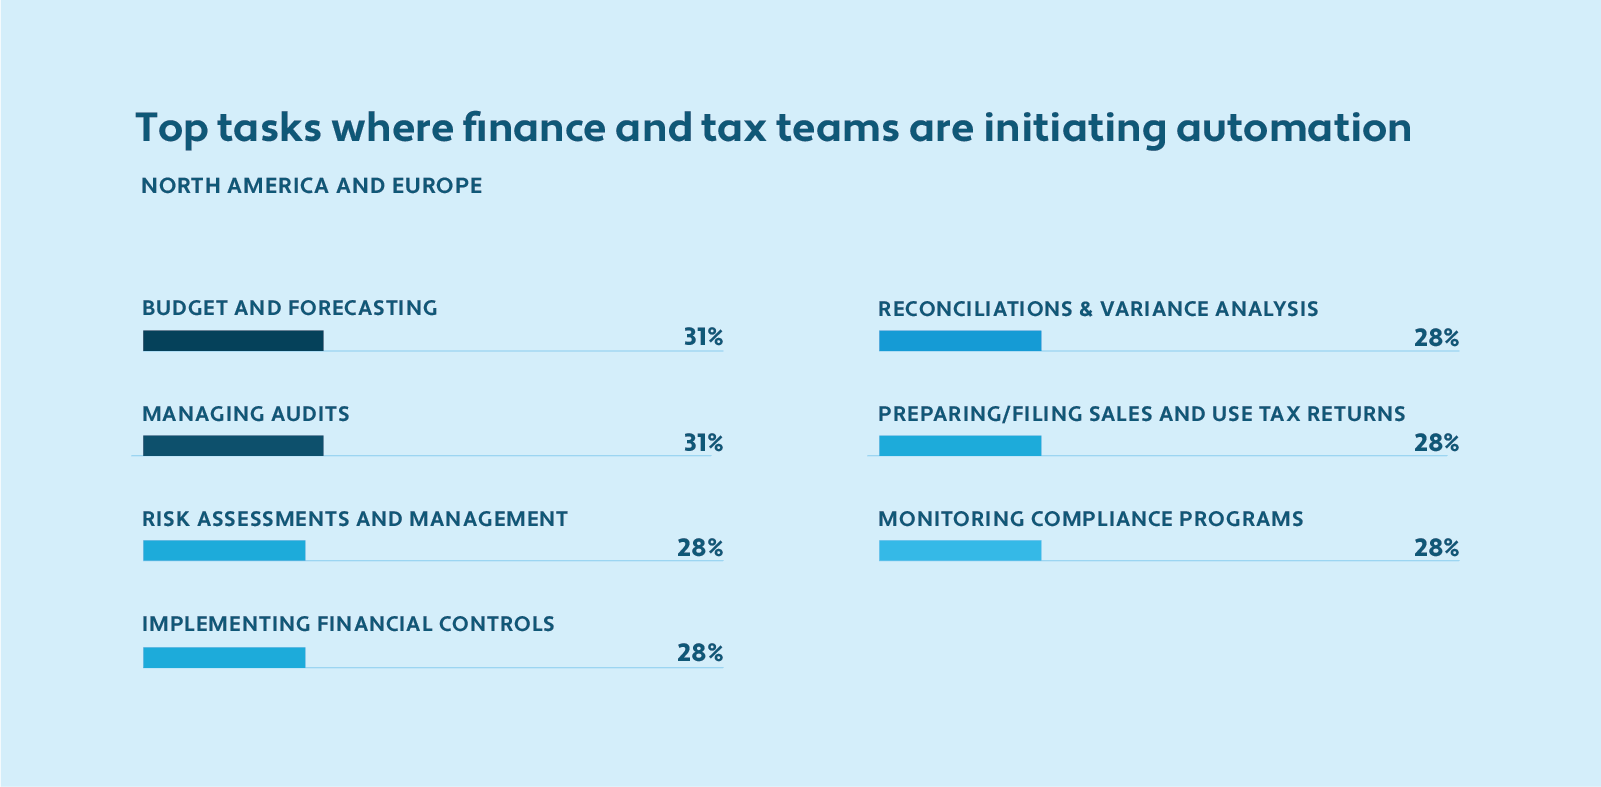 Chart showing the top tasks that survey respondents say their global finance and tax teams are automating.